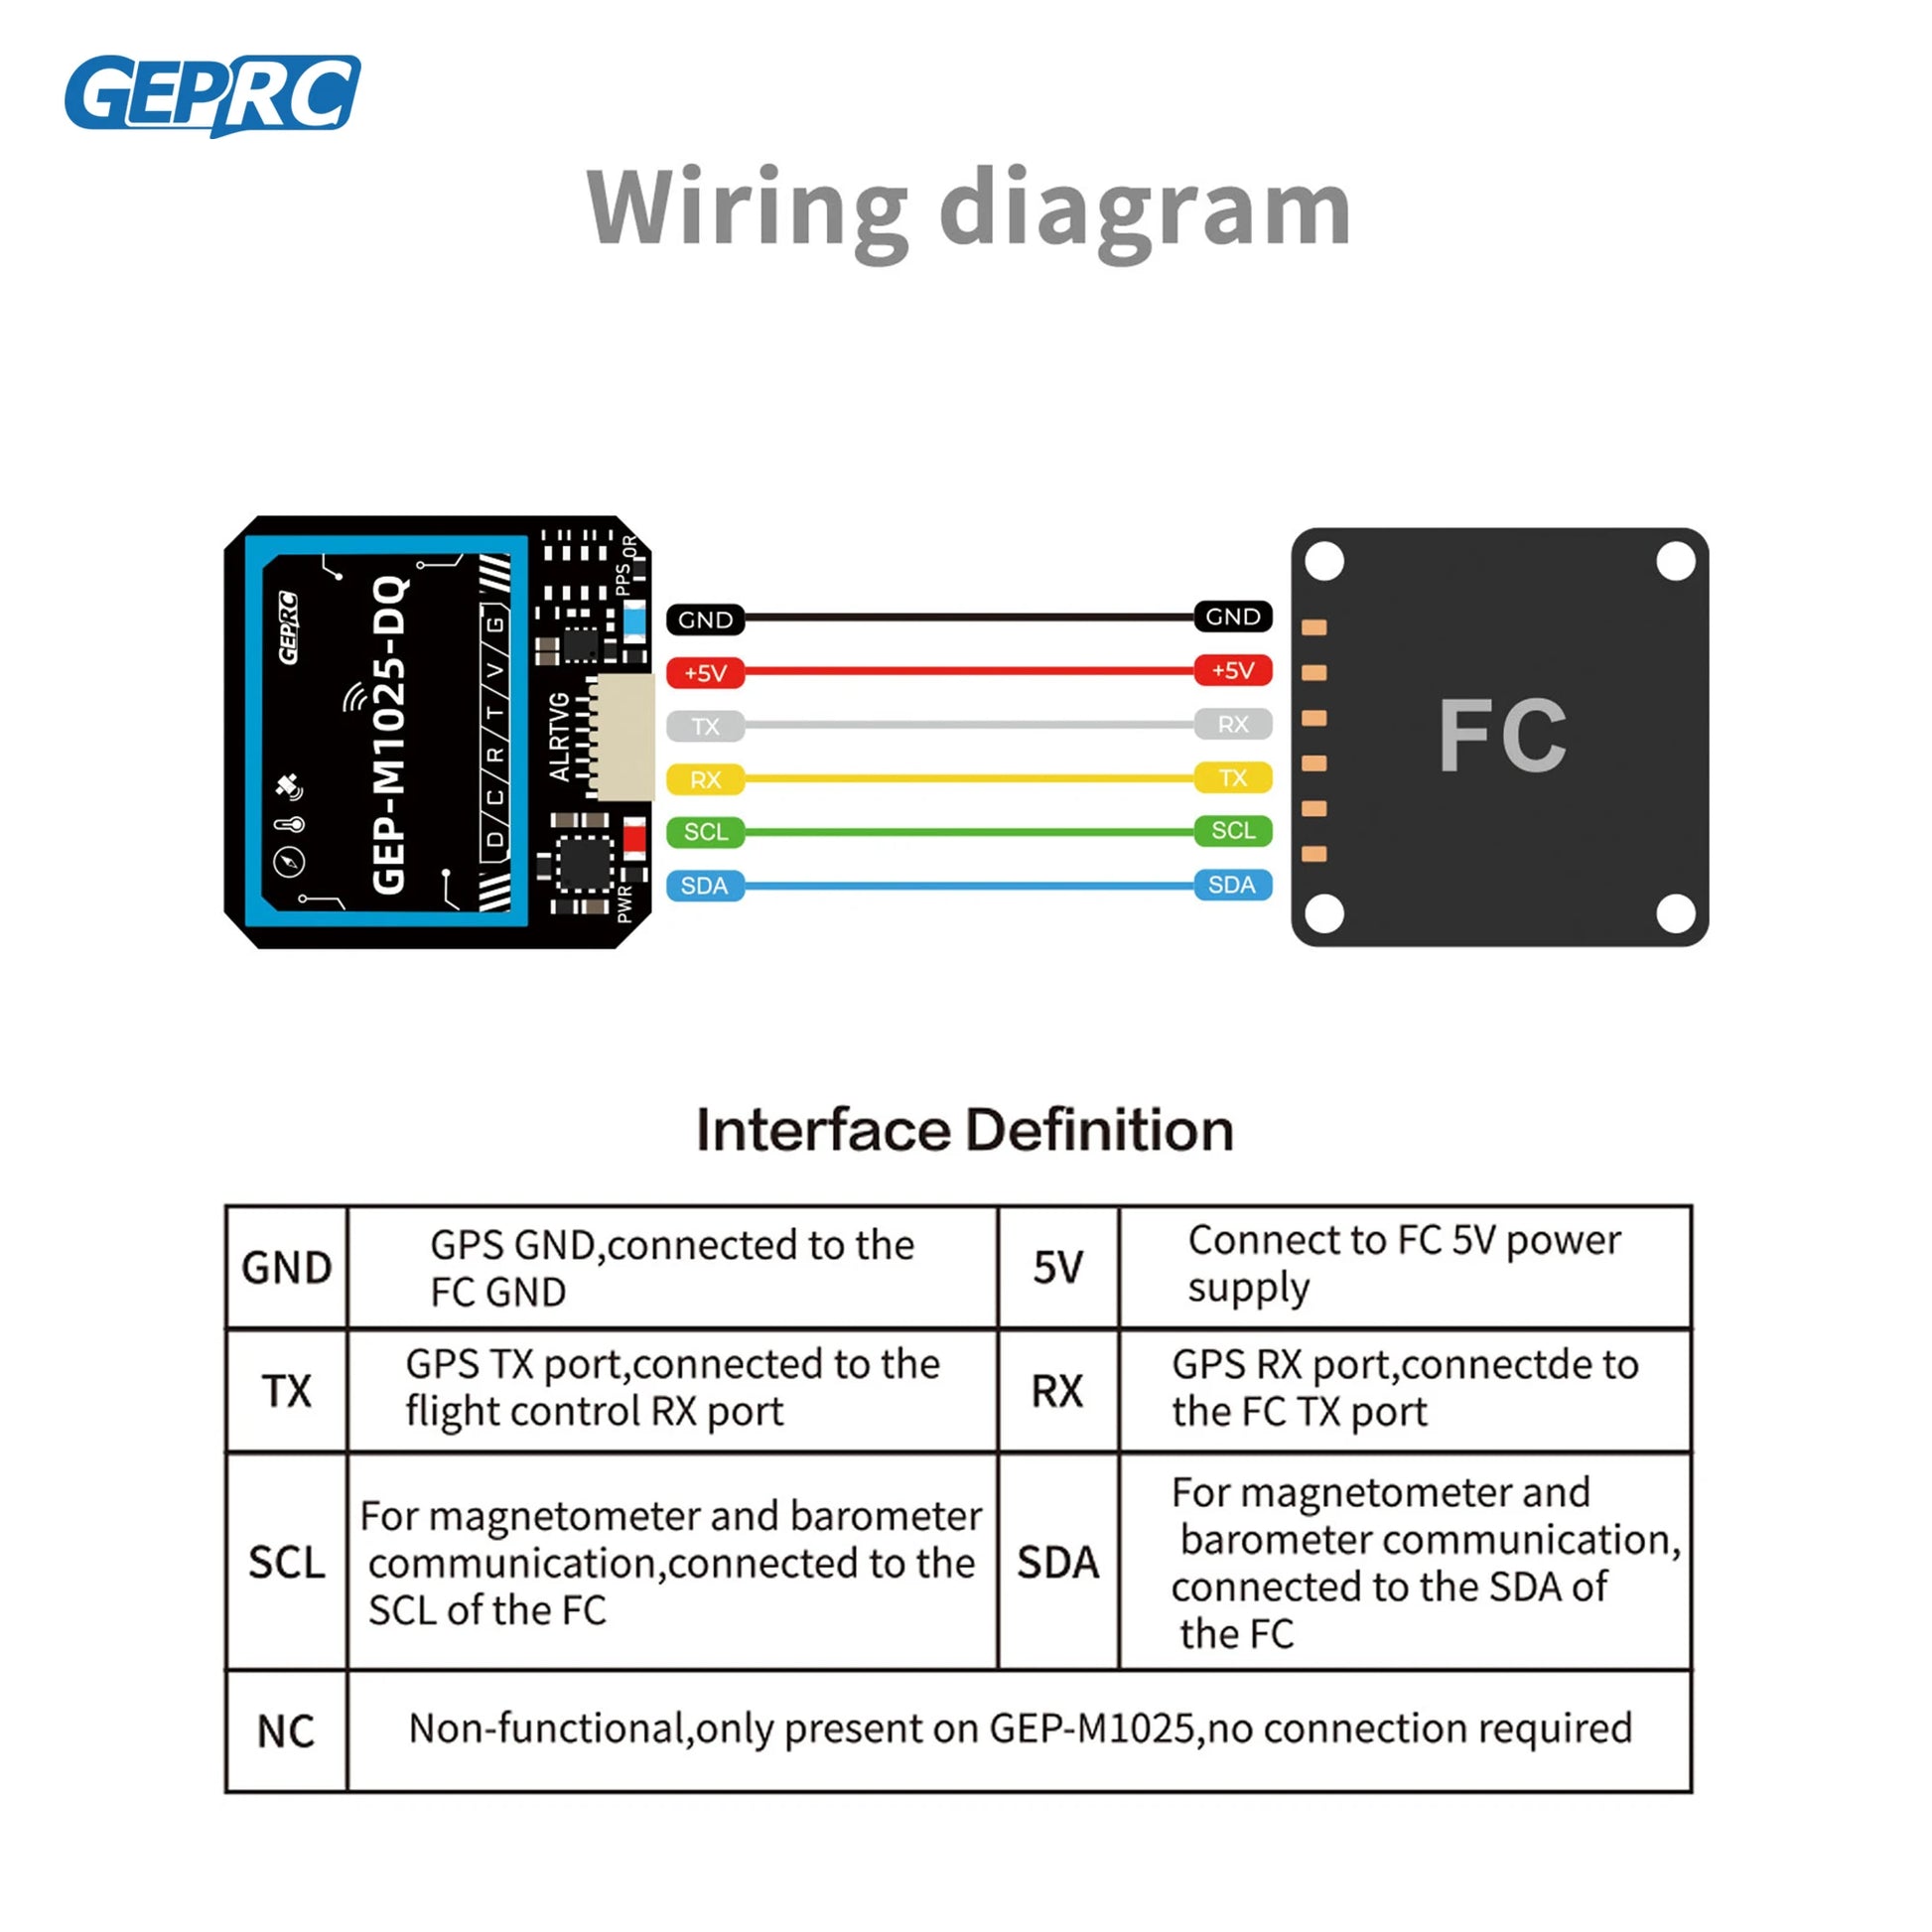 GEPRC GEP-M1025 Series, GEPRC Wiring diagram  8 GND GND,connected to the Connect to